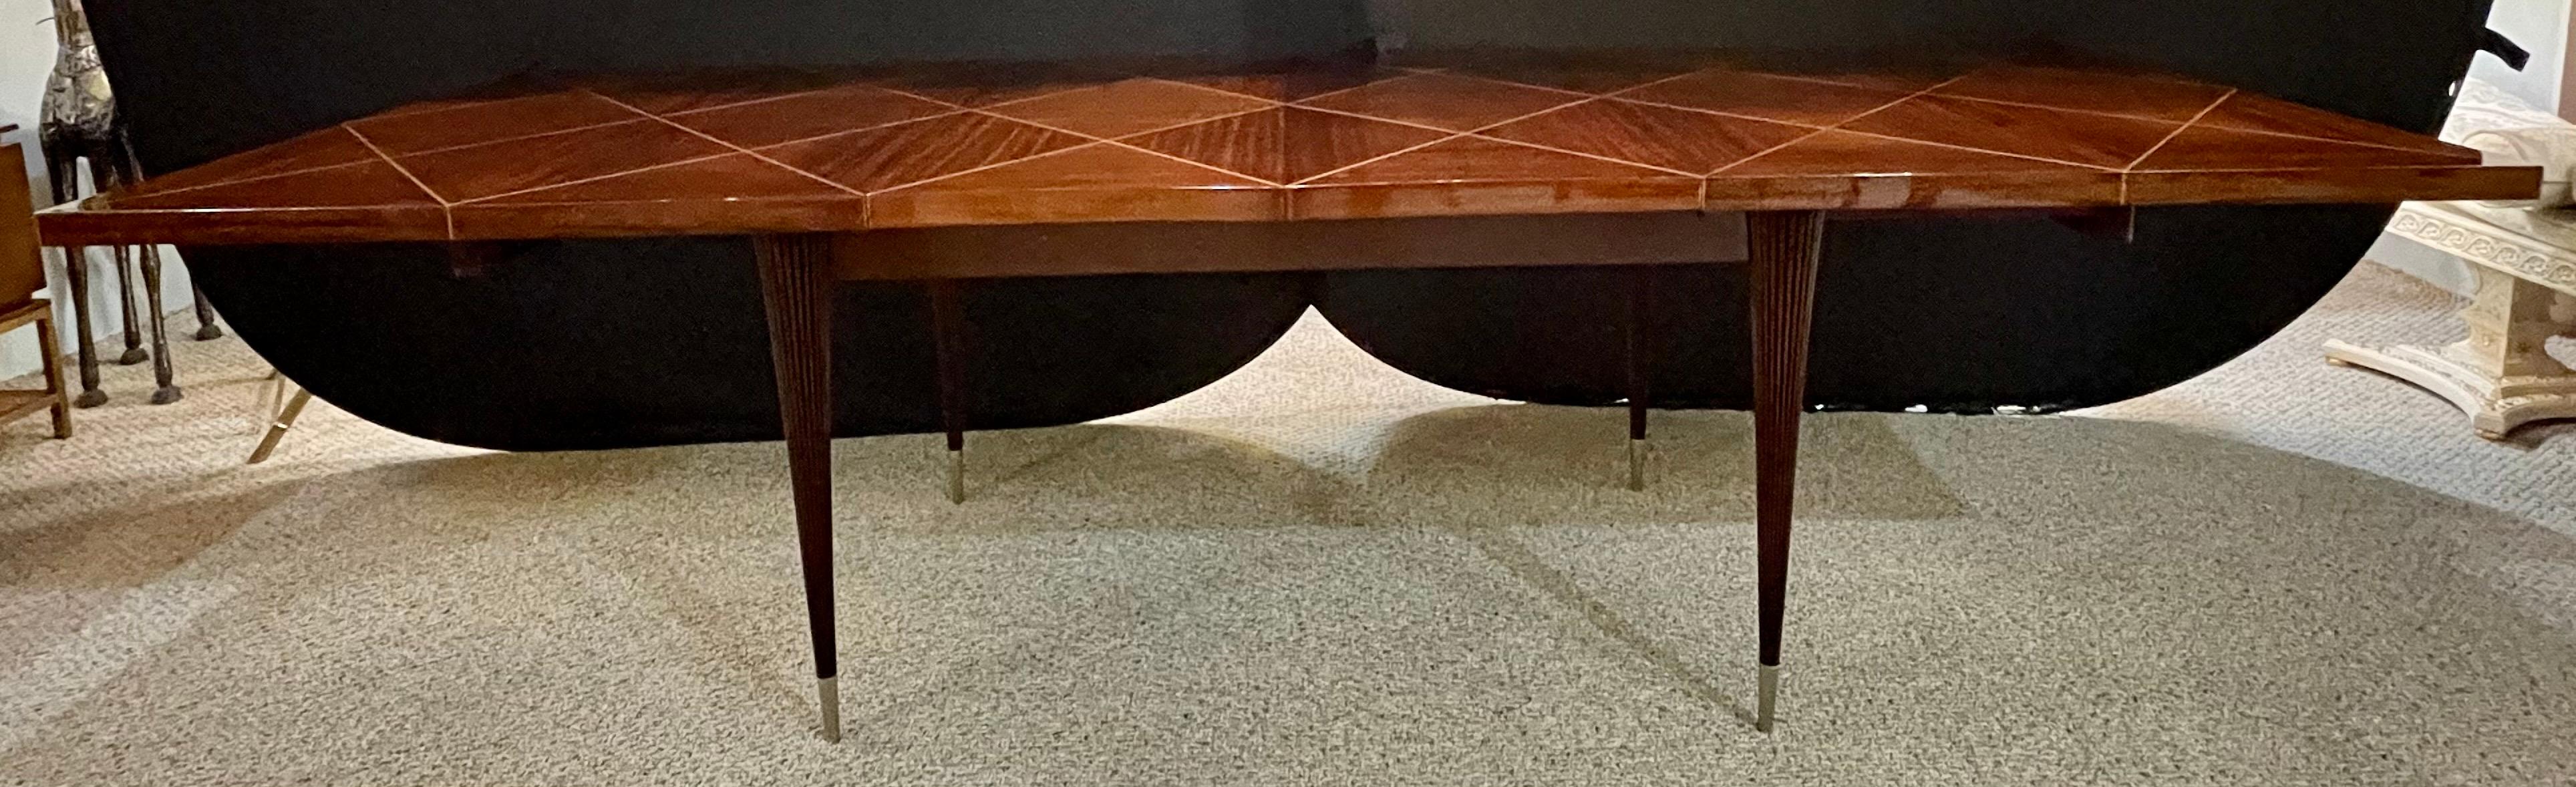 A Tommi Parzinger Originals Dining Table Fully Refinished with Two Leaves 5